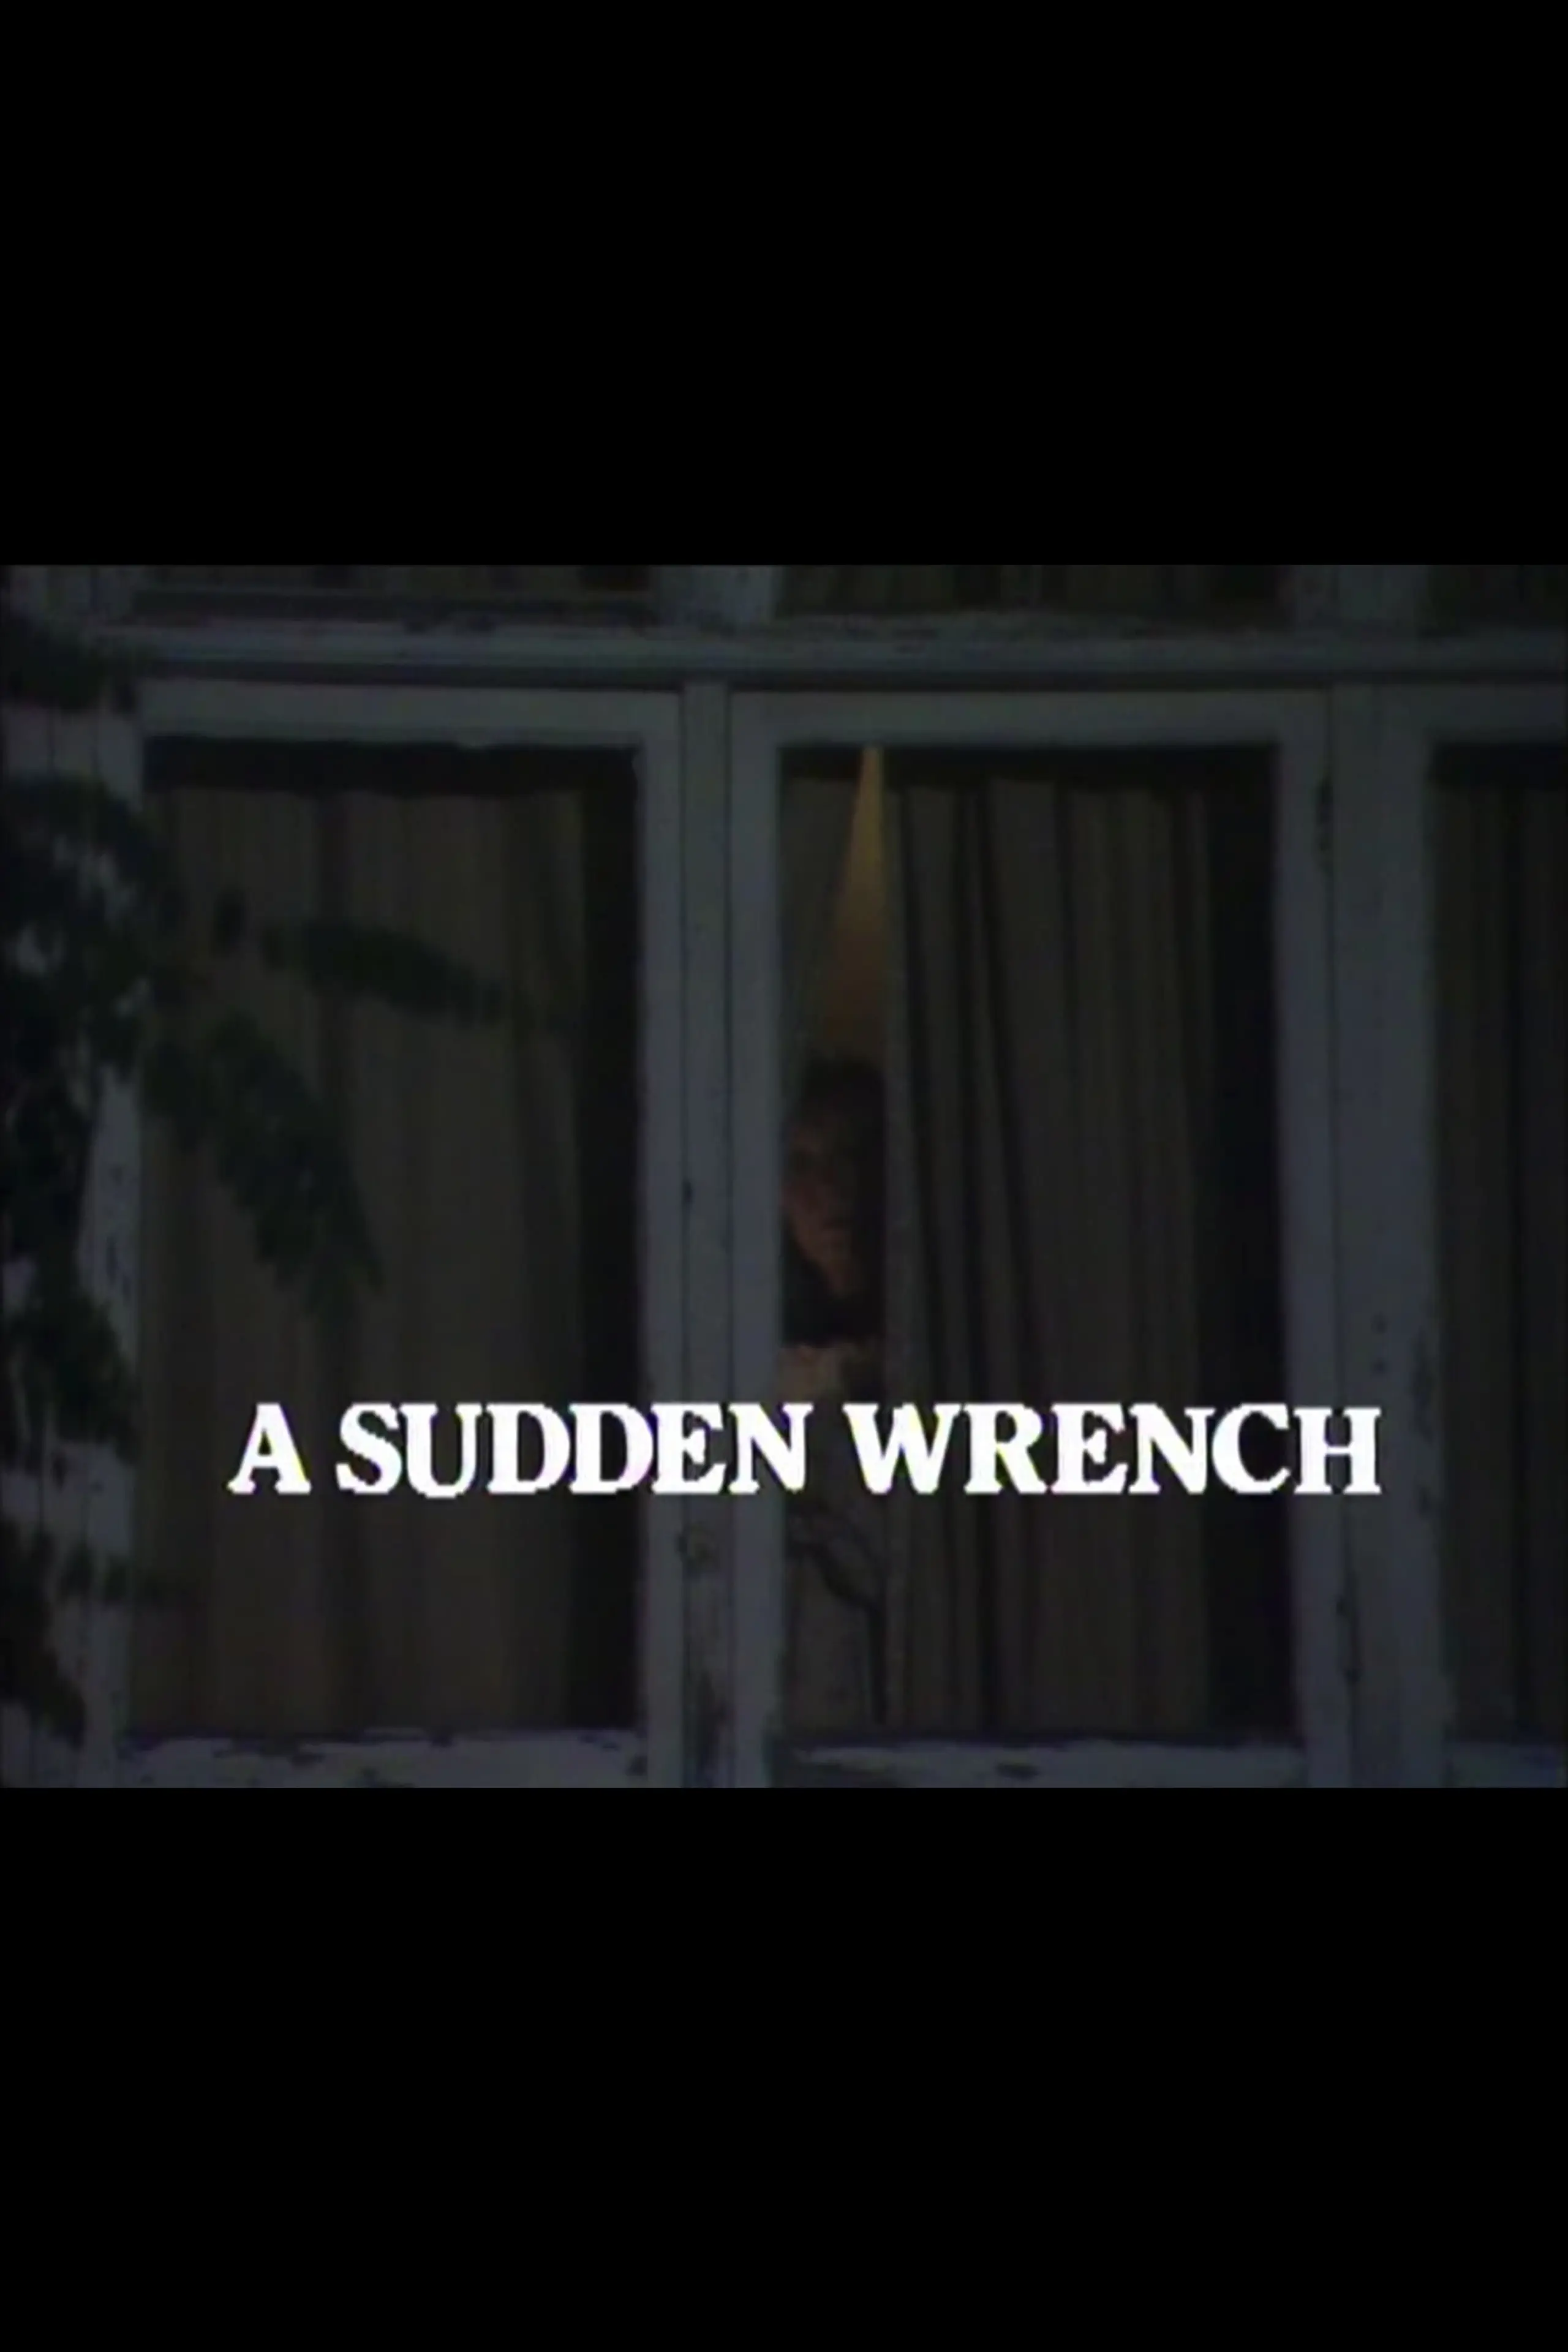 A Sudden Wrench